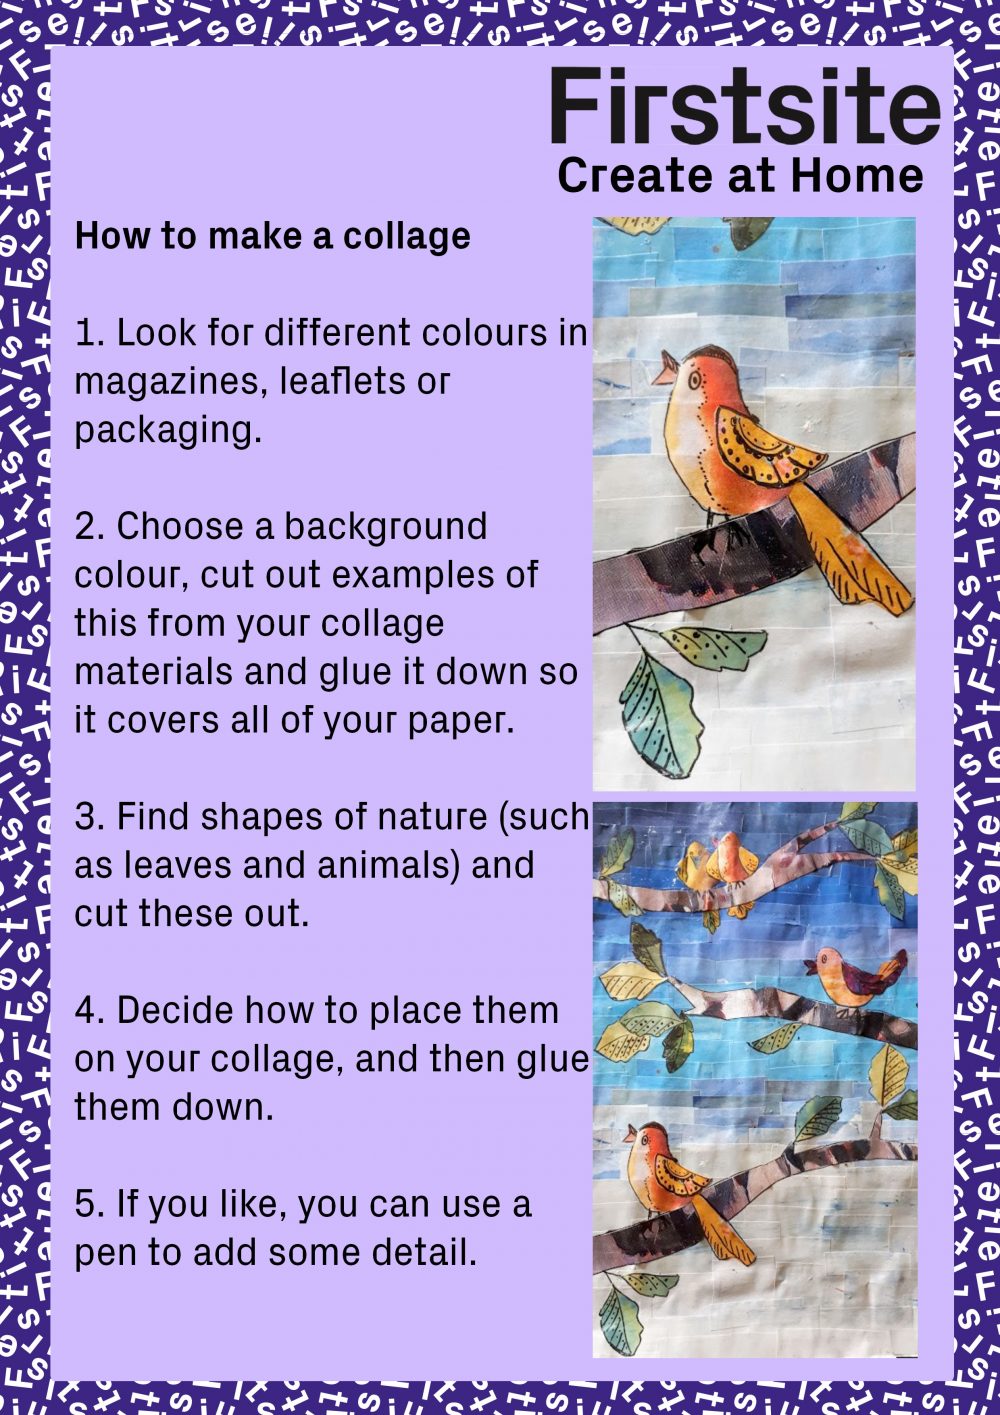 Image of instructions for how to make a nature collage